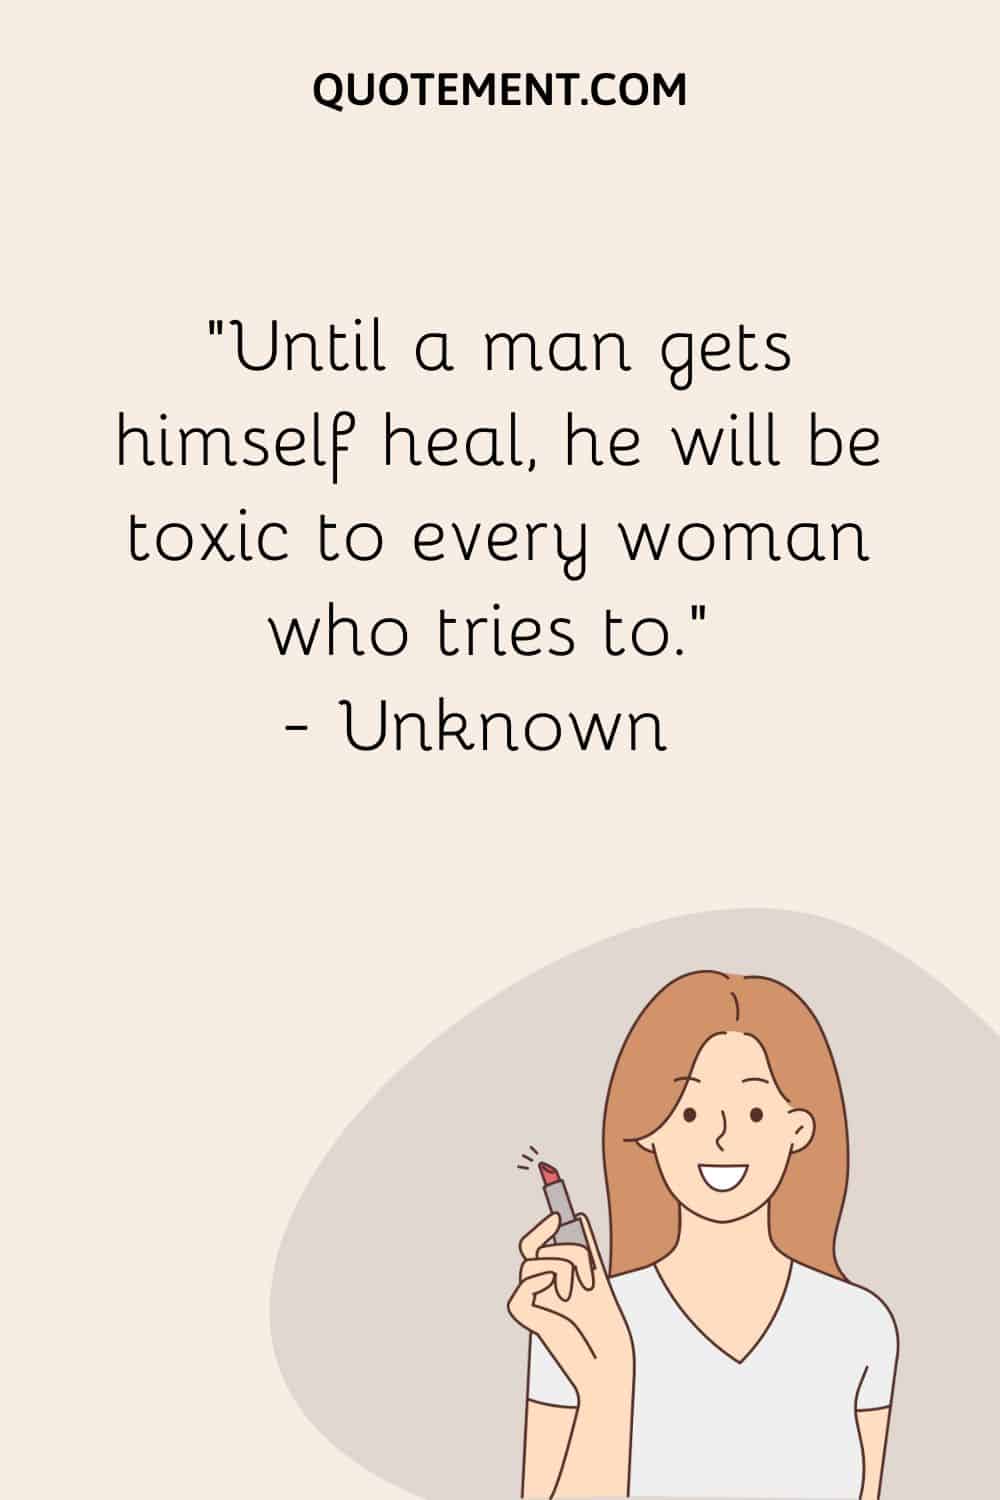 Until a man gets himself heal, he will be toxic to every woman who tries to